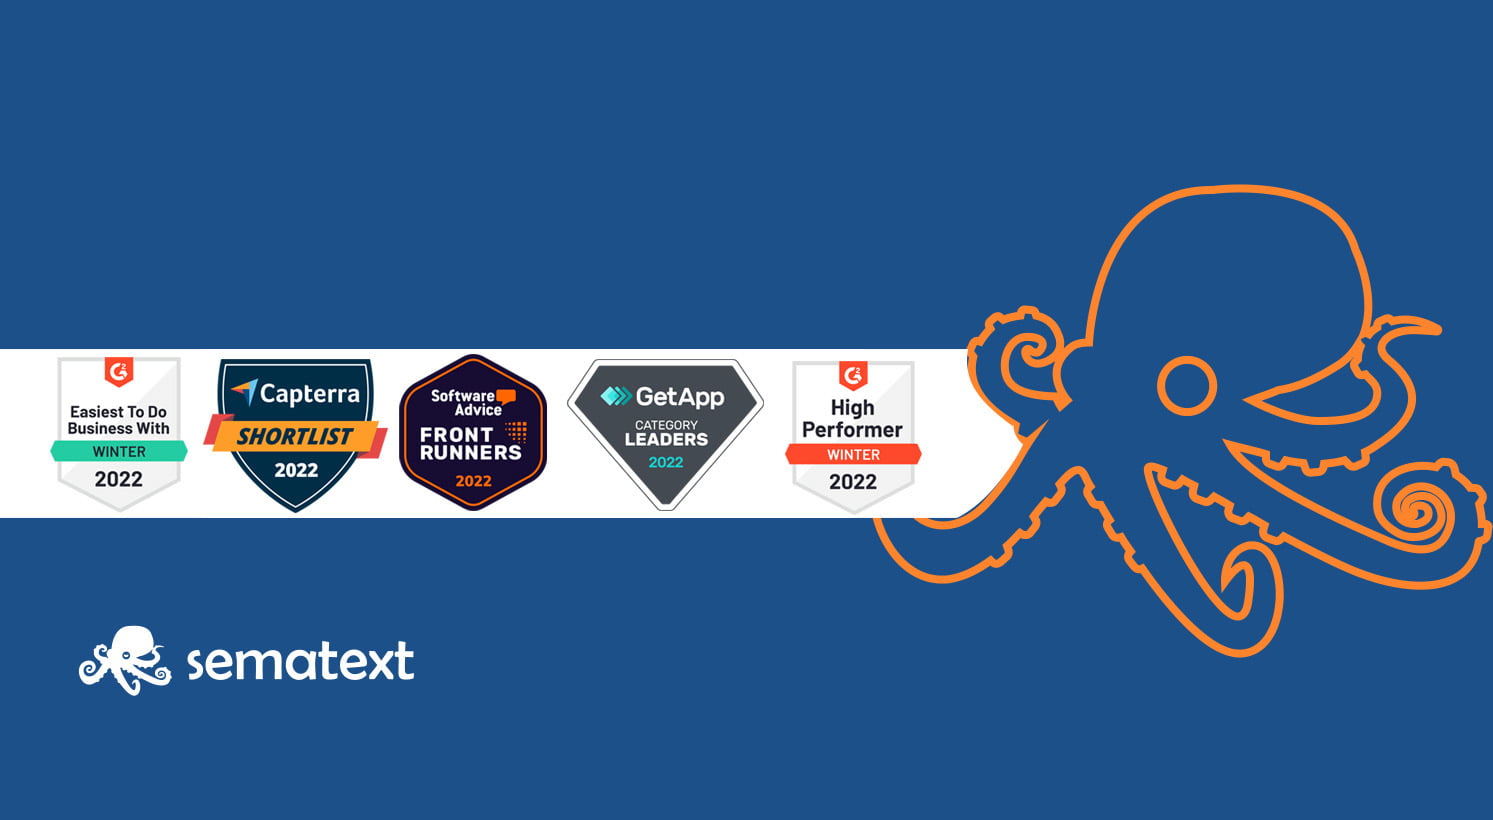 Sematext recognized as one of the Best Software Products by G2 and Gartner review platform communities